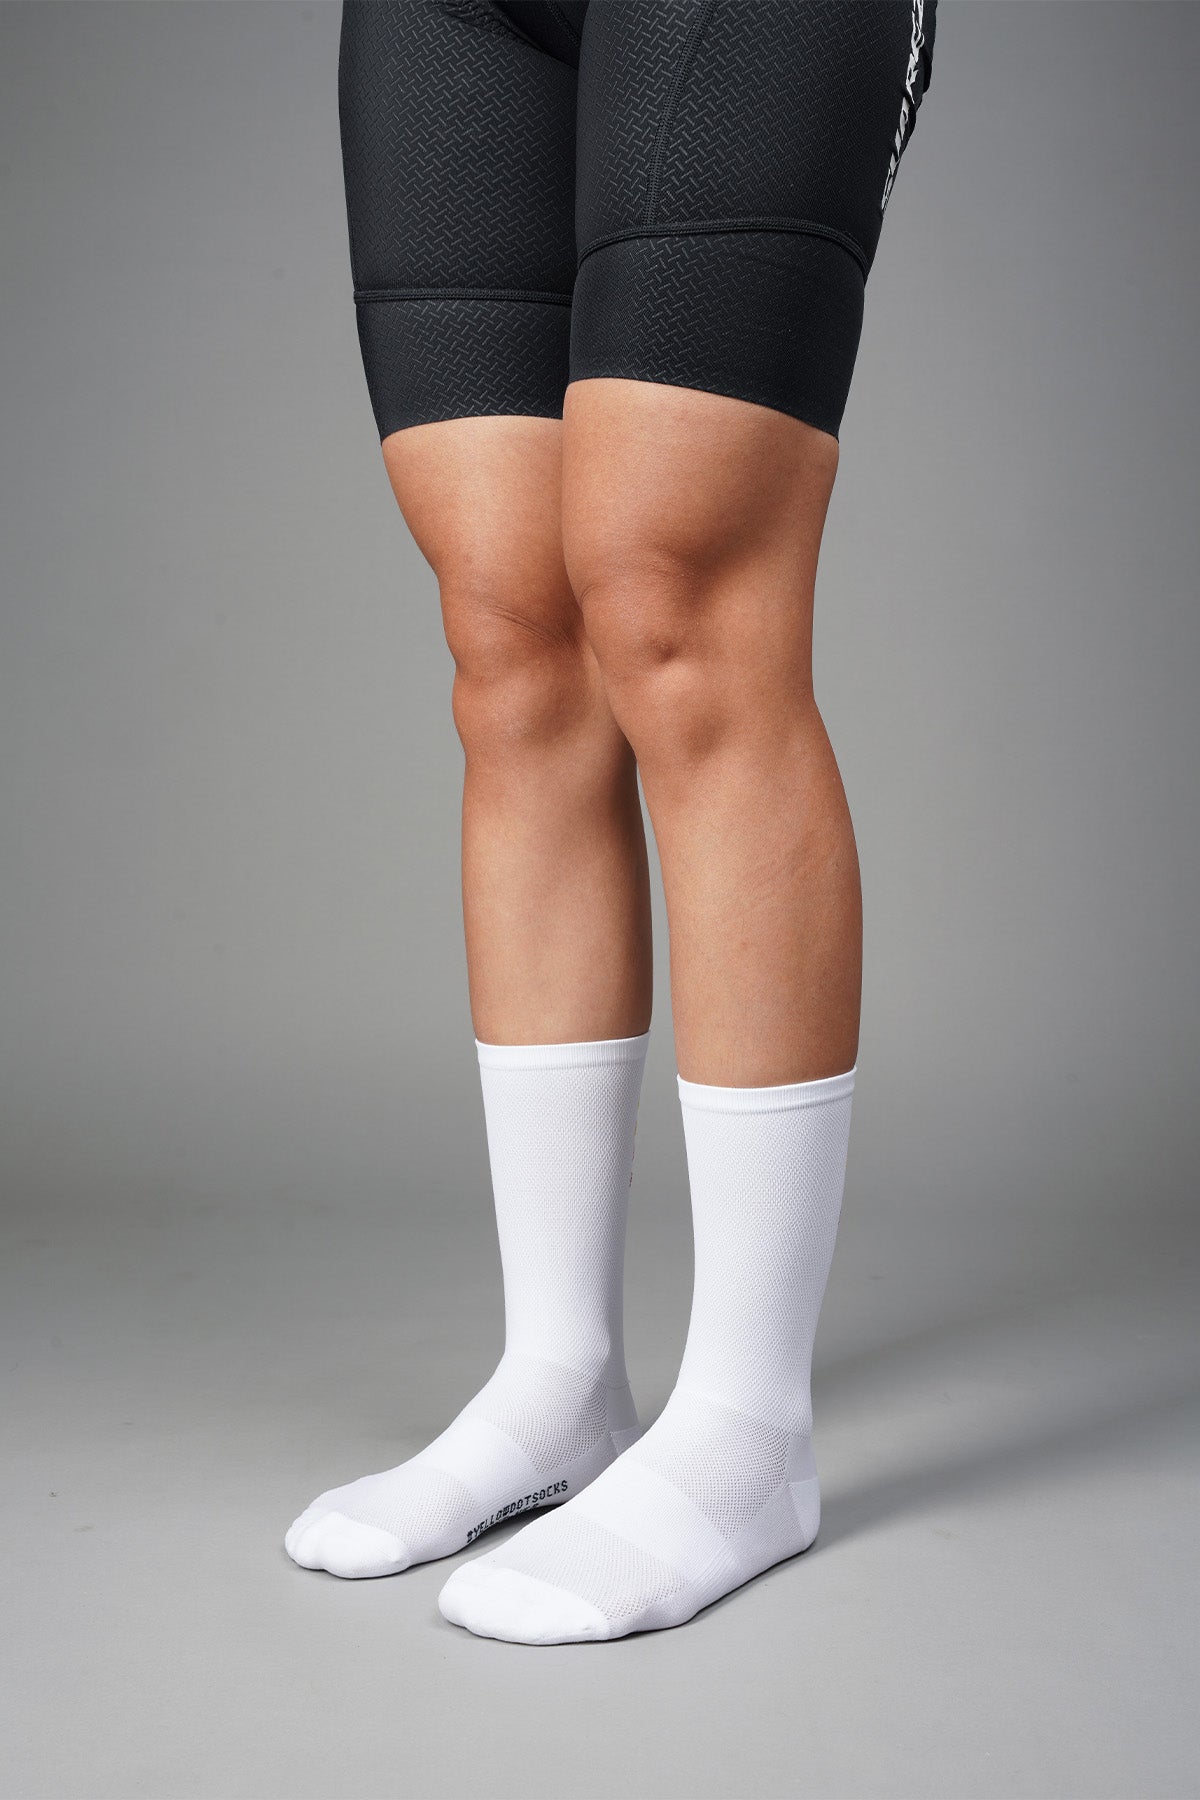 EAT RIDE SLEEP REPEAT - WHITE FRONT SIDE | BEST CYCLING SOCKS